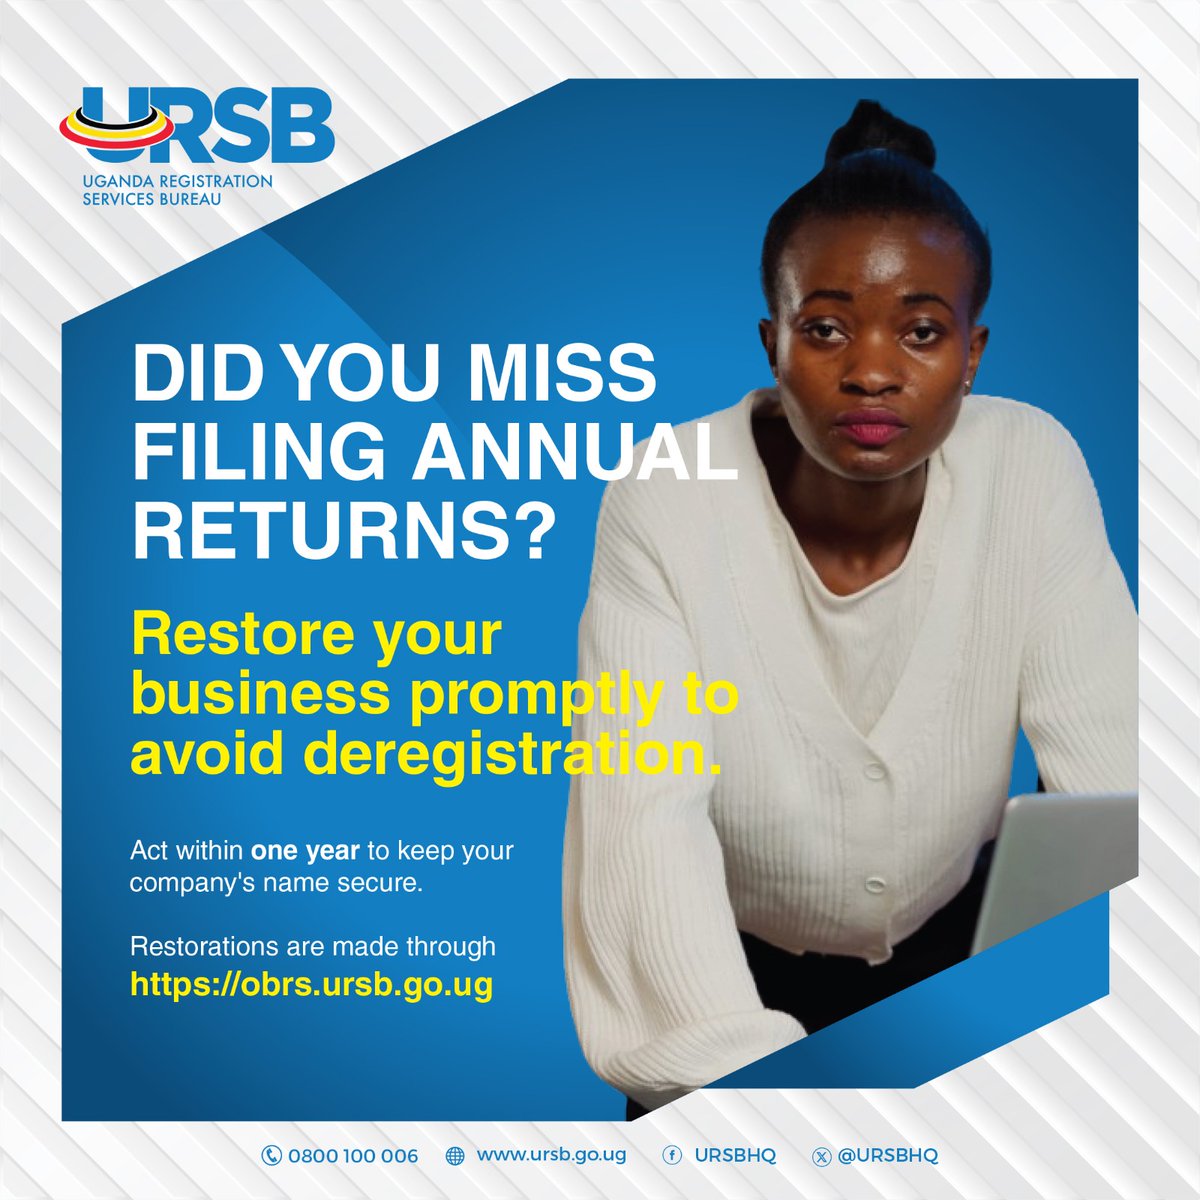 🚨 Don't let your business get left behind. Missed filing your annual returns? Act now to keep your business thriving. Quick and easy restorations available at obrs.ursb.go.ug/search. #BusinessRegistrationUG.